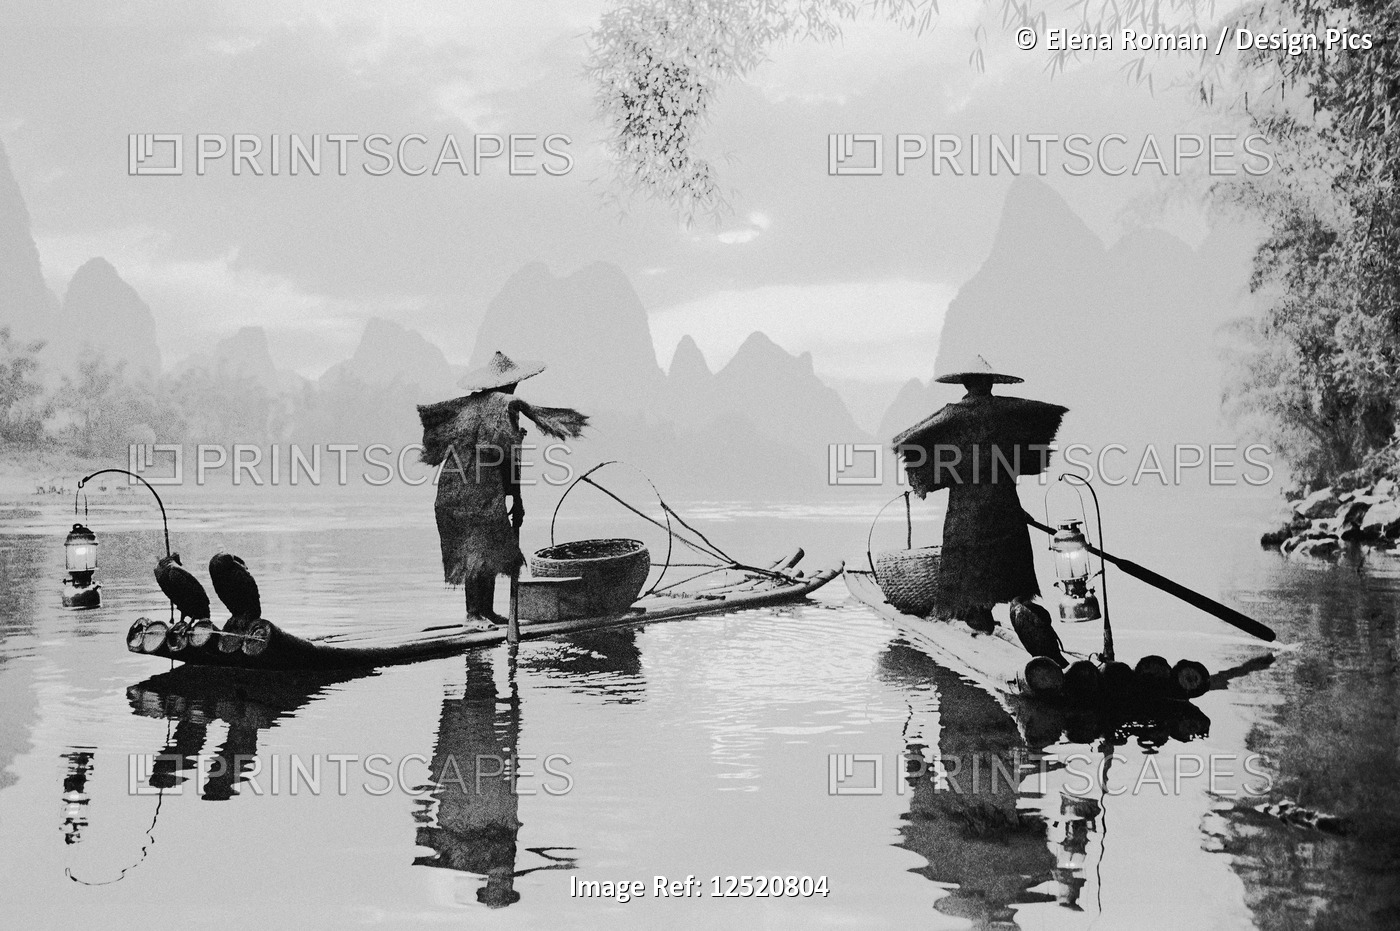 Black and white image of fishermen standing on boats on a tranquil river in the ...